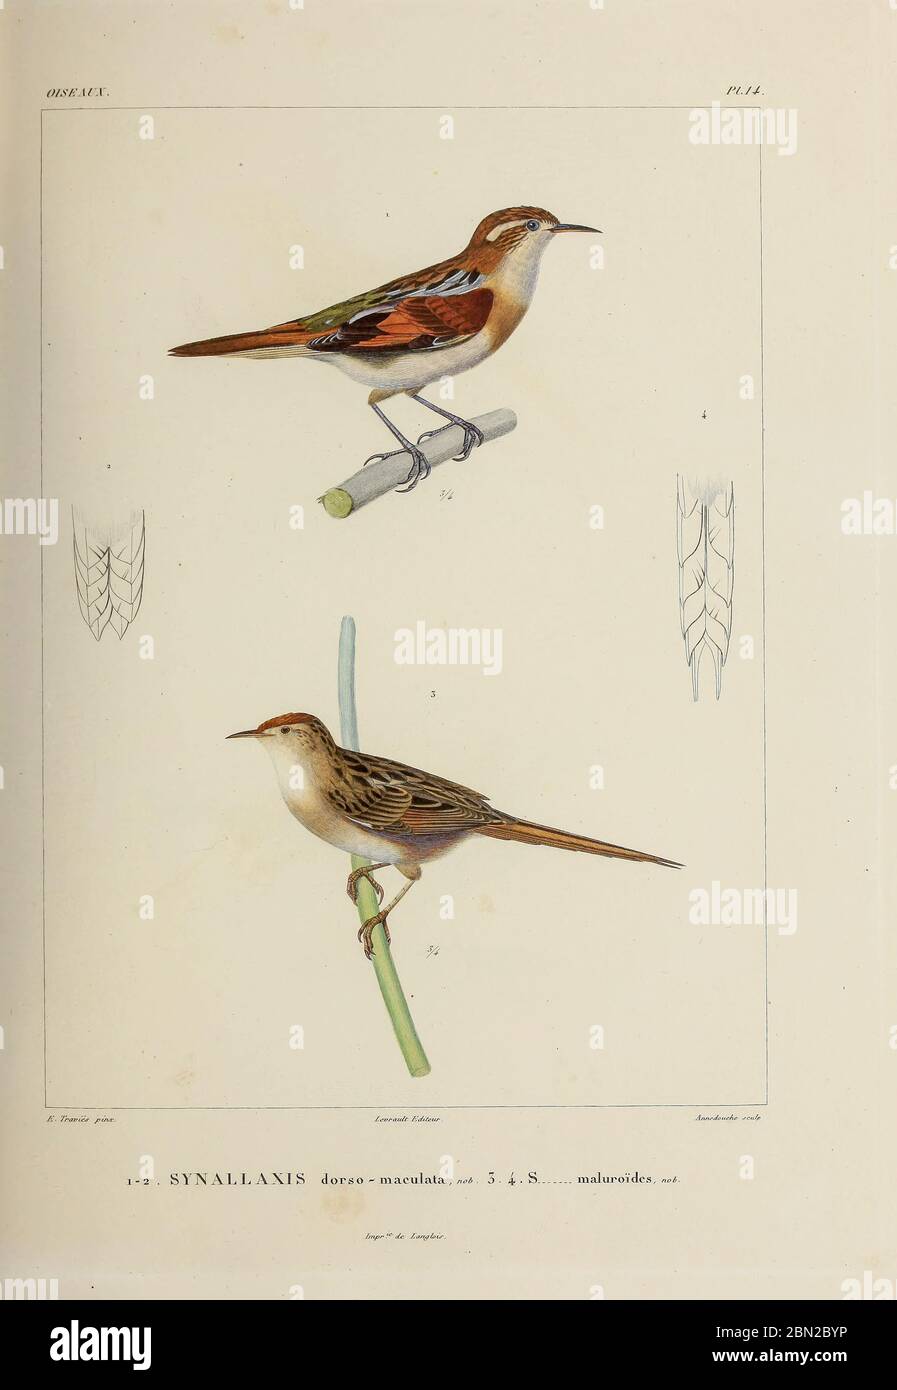 hand coloured sketch Top: wren-like rushbird (Phleocryptes melanops [Here as Synallaxis dorso-maculata]) Bottom: bay-capped wren-spinetail (Spartonoica maluroides) [Here as Synallaxis maluroides]) From the book 'Voyage dans l'Amérique Méridionale' [Journey to South America: (Brazil, the eastern republic of Uruguay, the Argentine Republic, Patagonia, the republic of Chile, the republic of Bolivia, the republic of Peru), executed during the years 1826 - 1833] 4th volume Part 3 By: Orbigny, Alcide Dessalines d', d'Orbigny, 1802-1857; Montagne, Jean François Camille, 1784-1866; Martius, Karl Frie Stock Photo